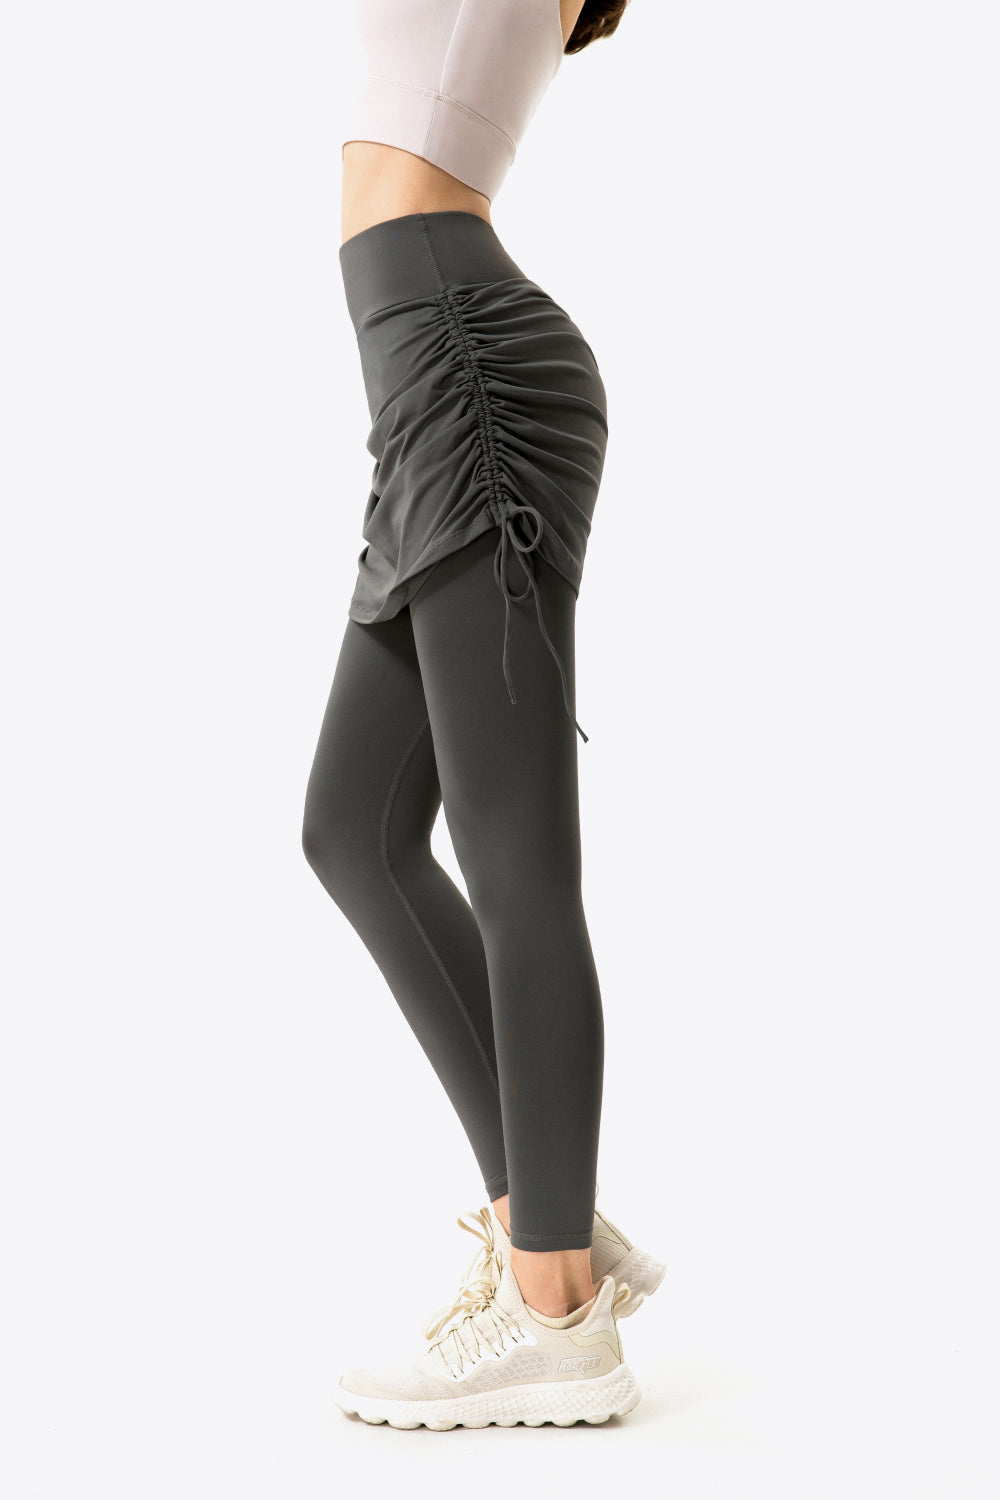 Drawstring Ruched Faux Layered Yoga Leggings - Women’s Clothing & Accessories - Pants - 18 - 2024